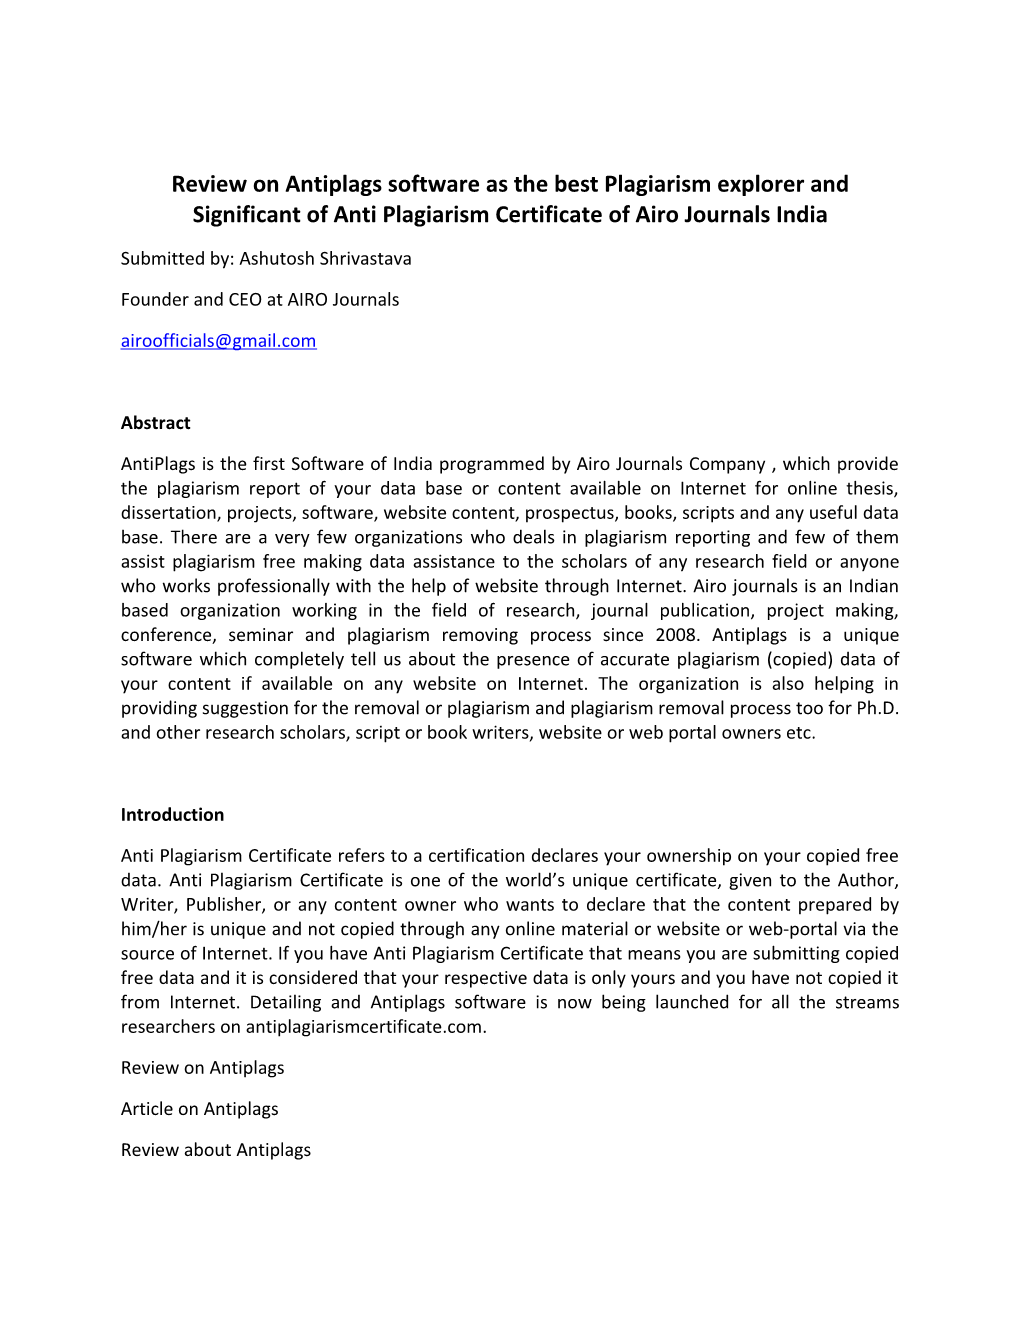 Review on Antiplagssoftware As the Best Plagiarism Explorer and Significant of Anti Plagiarism